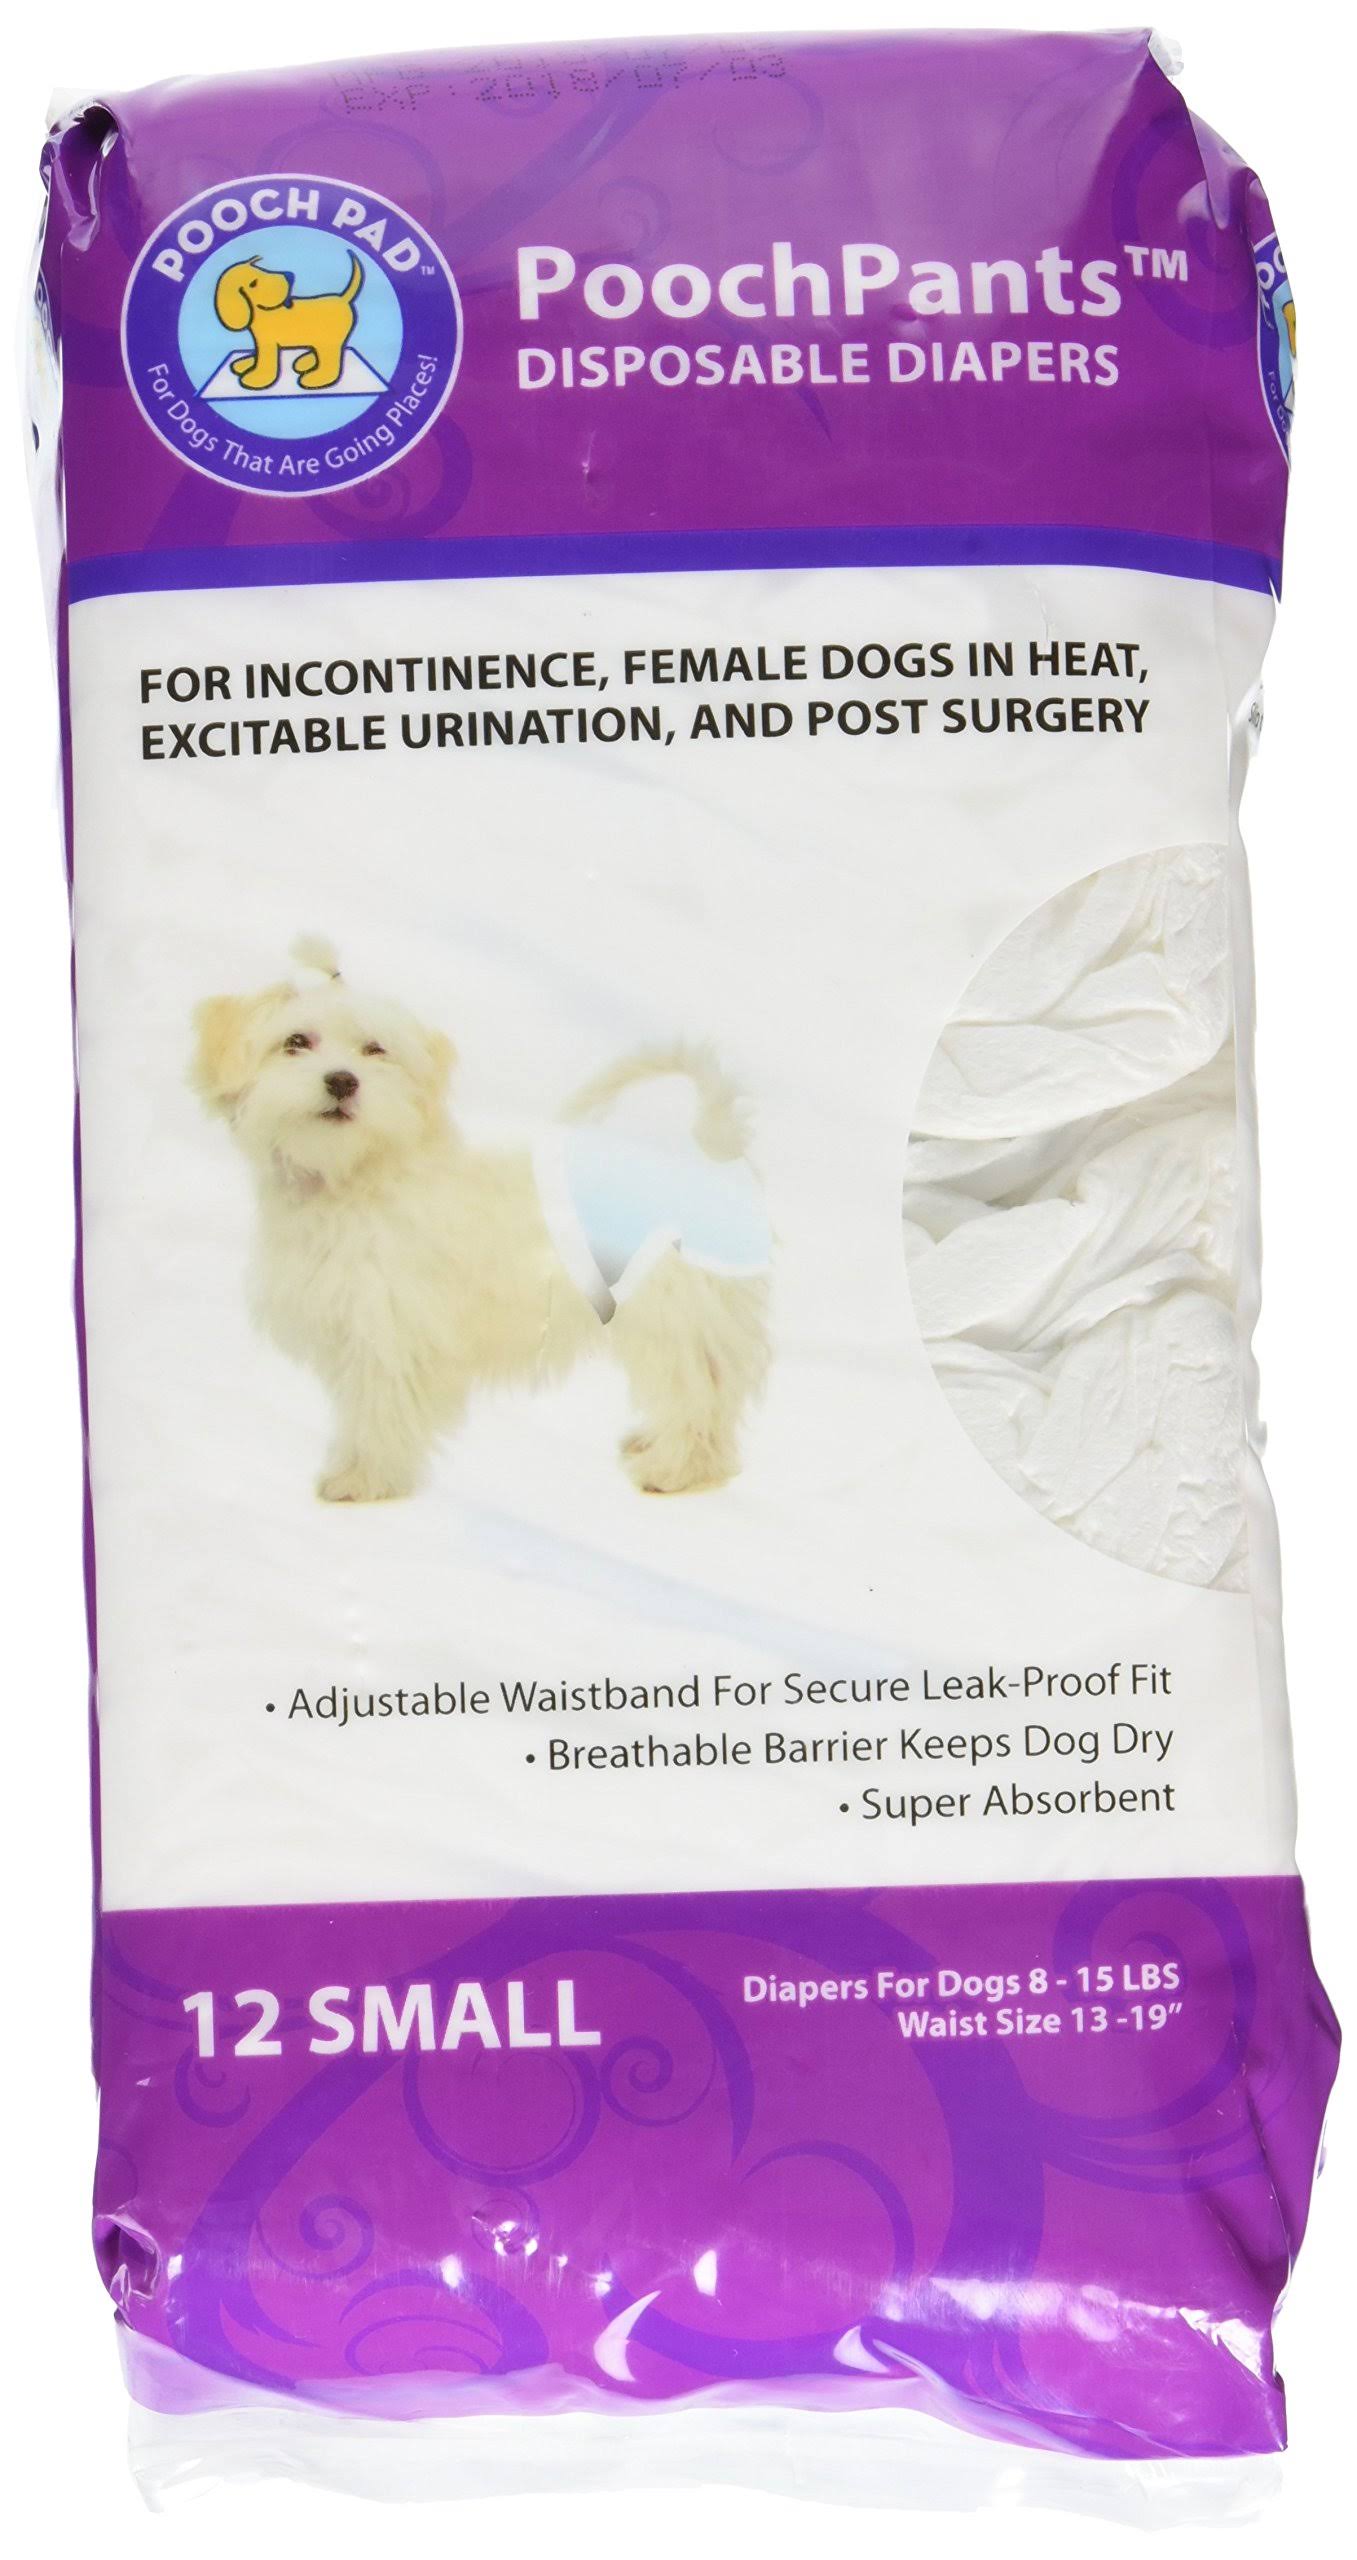 Poochpants Disposable Diaper - Small, 12pk